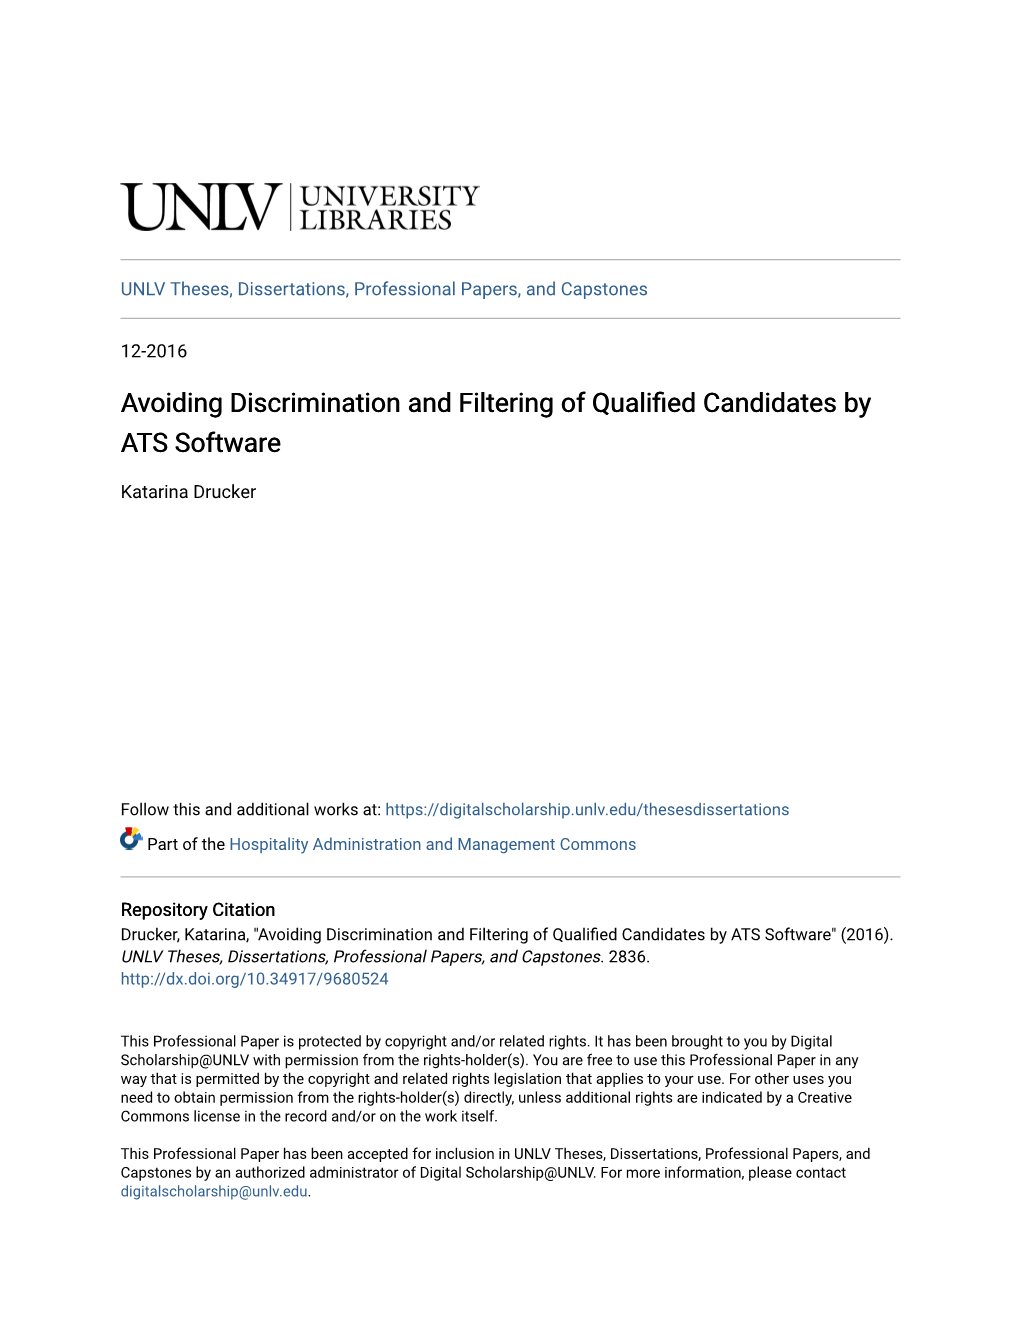 Avoiding Discrimination and Filtering of Qualified Candidates by ATS Software